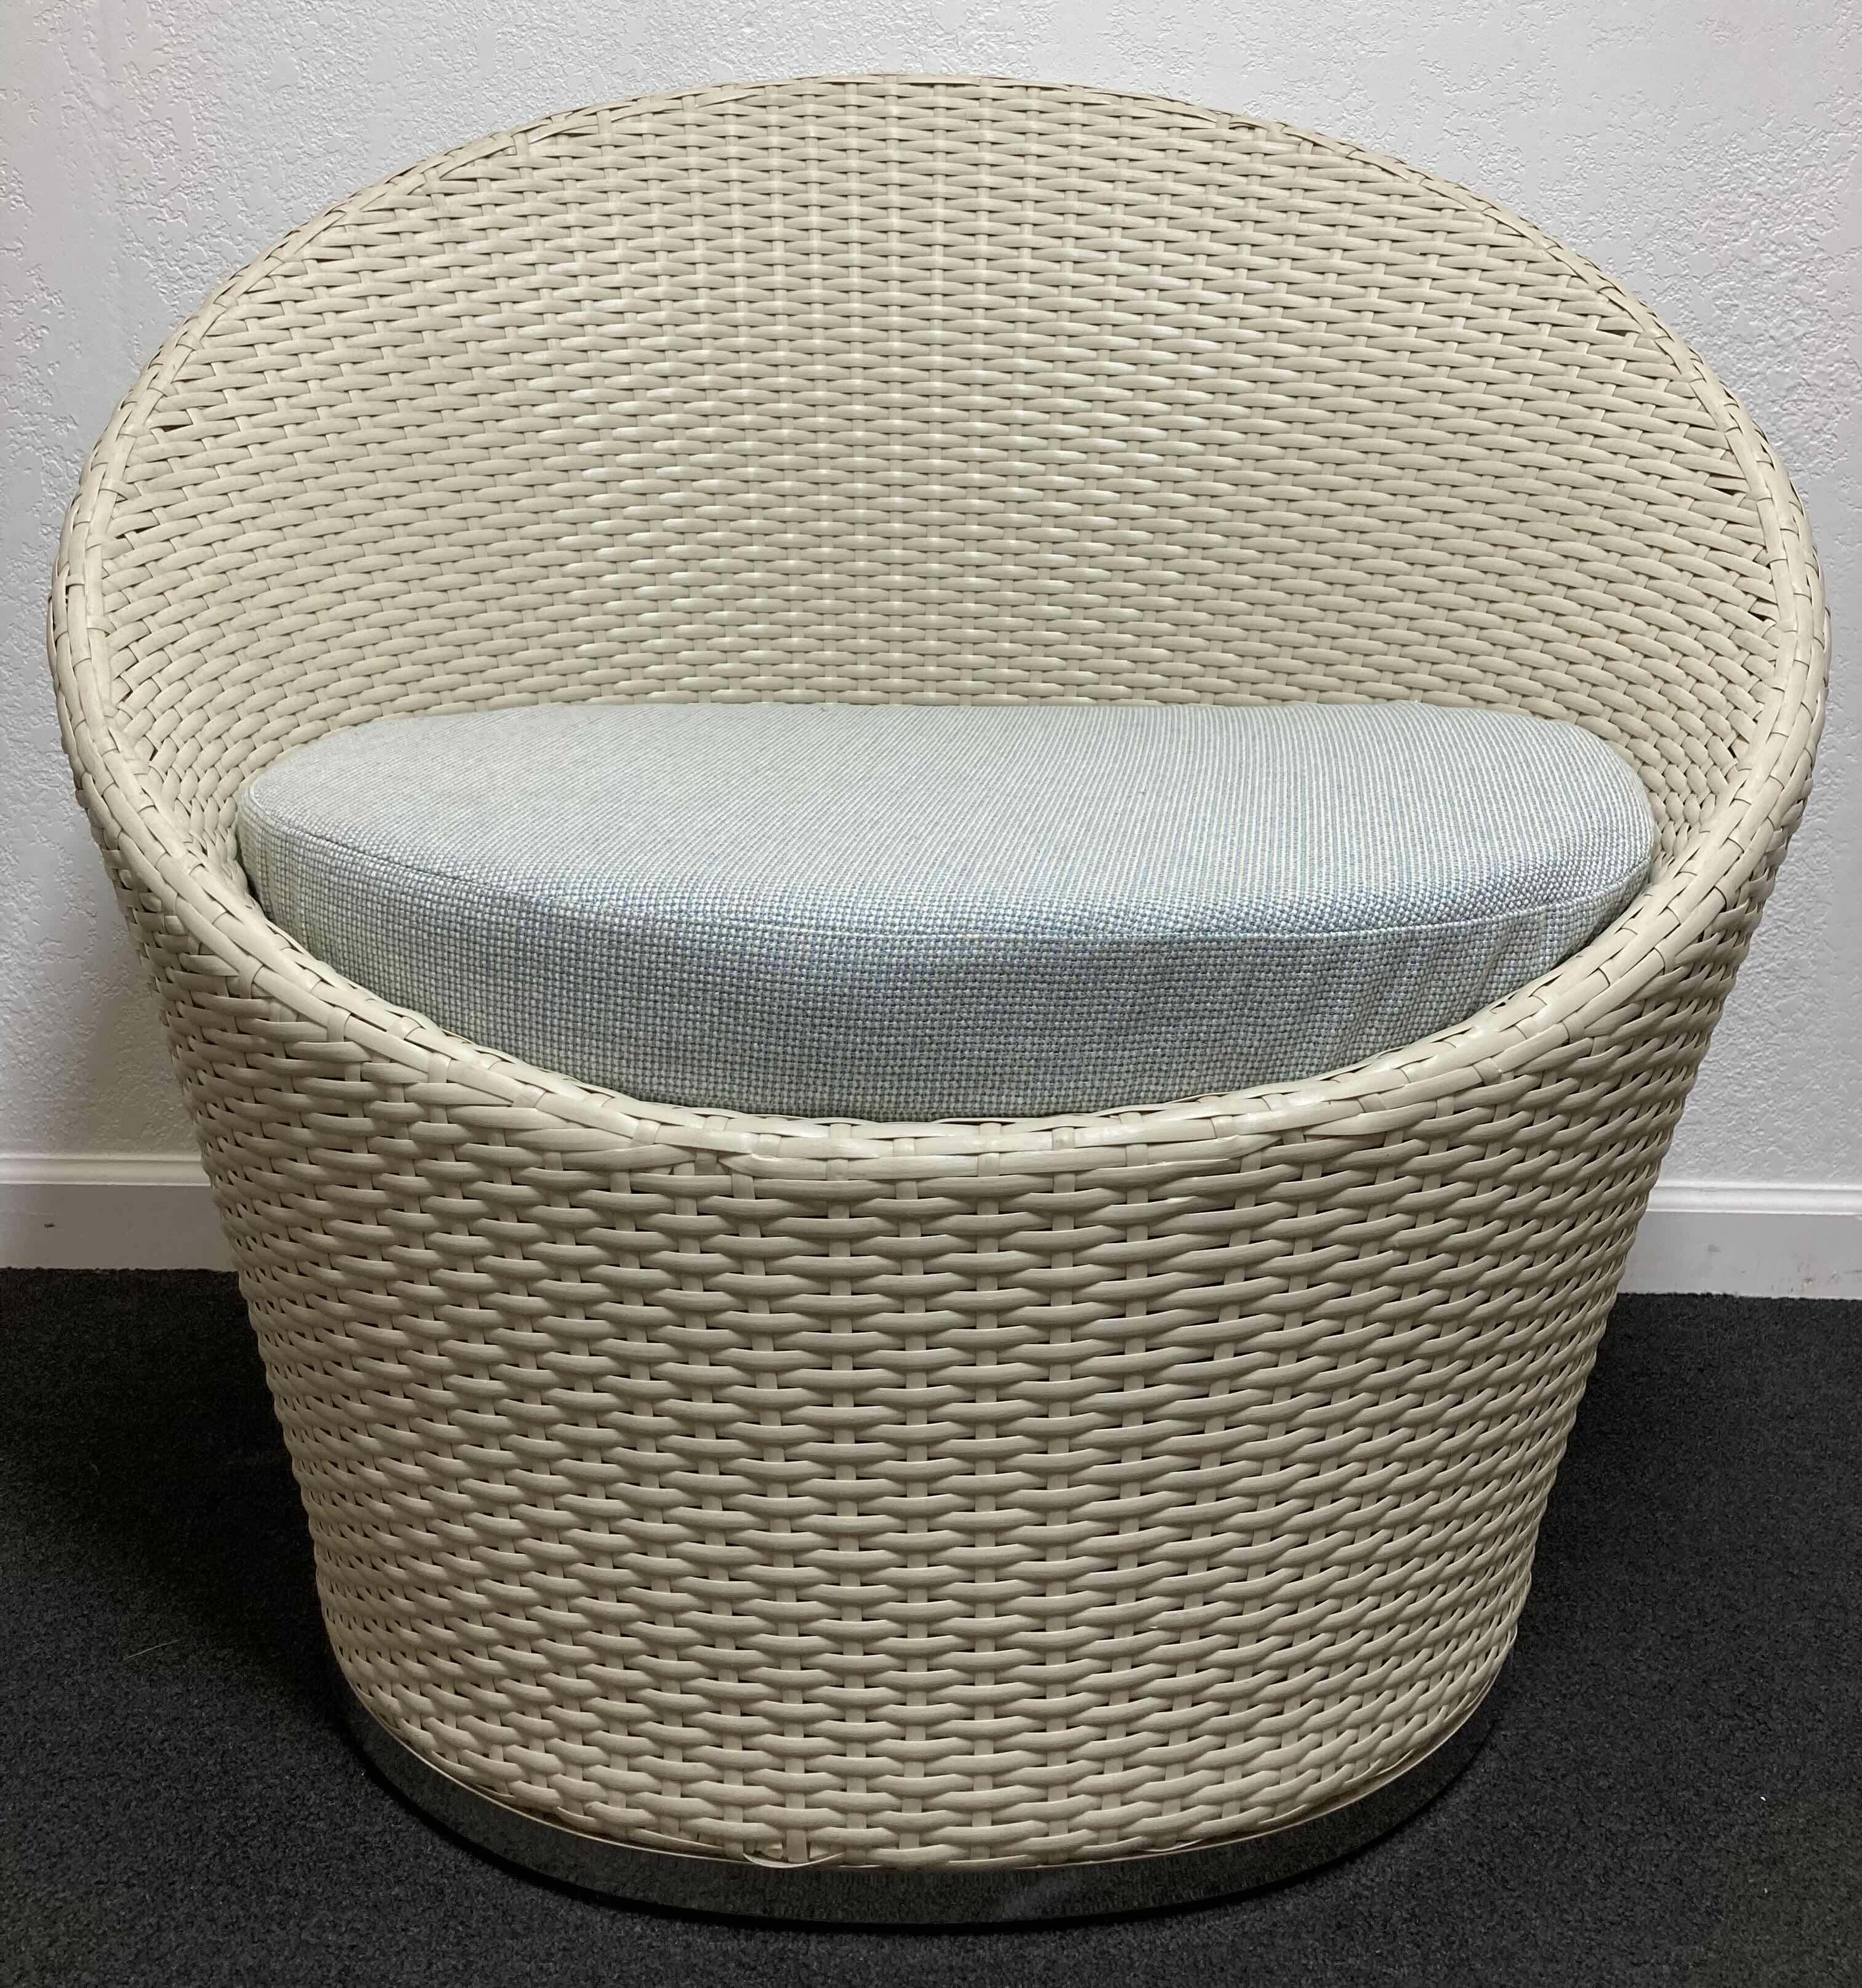 Photo 1 of SILHOUETTE OUTDOOR FURNITURE OFF-WHITE LUXURY WOVEN WICKER LOUNGE CHAIR W SEAT CUSHION & CHROME FINISH BASE 33” X 24” H28.5”